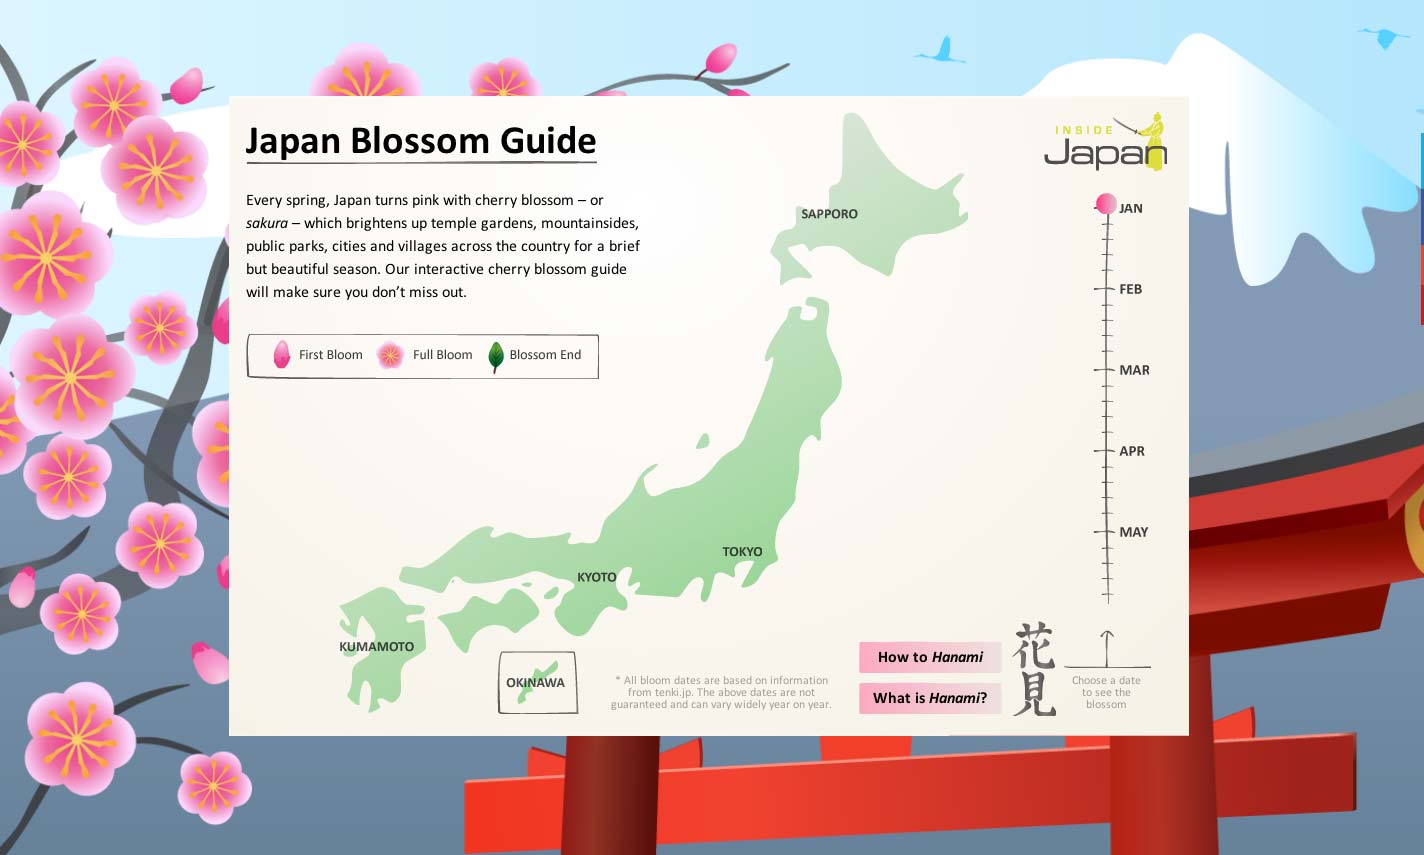 <p>The cherry blossom season in Japan usually begins in Okinawa in around January/February, passes through the middle of Japan in March and April, and finishes with a late bloom in northern Hokkaido in May. In areas of high altitude, the blossom also arrives rather later than in low-altitude regions.</p>

<p>Tokyo traditionally sees its first blossoms in the dying days of March, with full bloom falling around April 5. Kyoto follows a day or two later, while the mountainous areas around Takayama and Matsumoto bloom about two weeks later - beginning in mid-April.</p>
